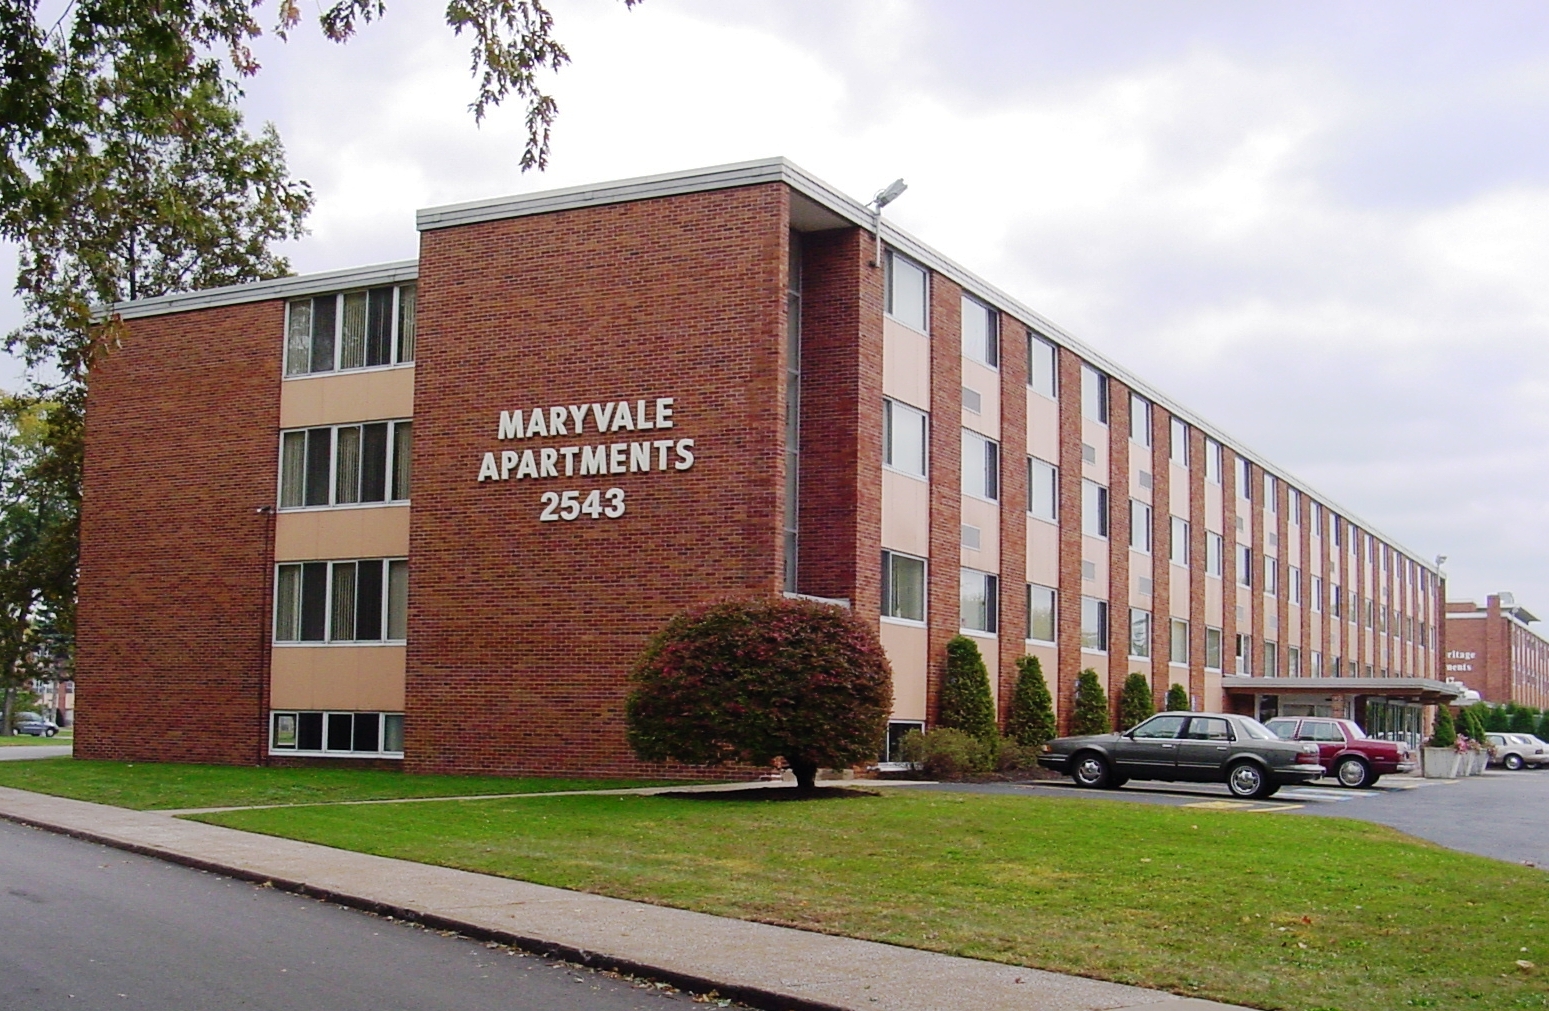 MARYVALE APARTMENTS